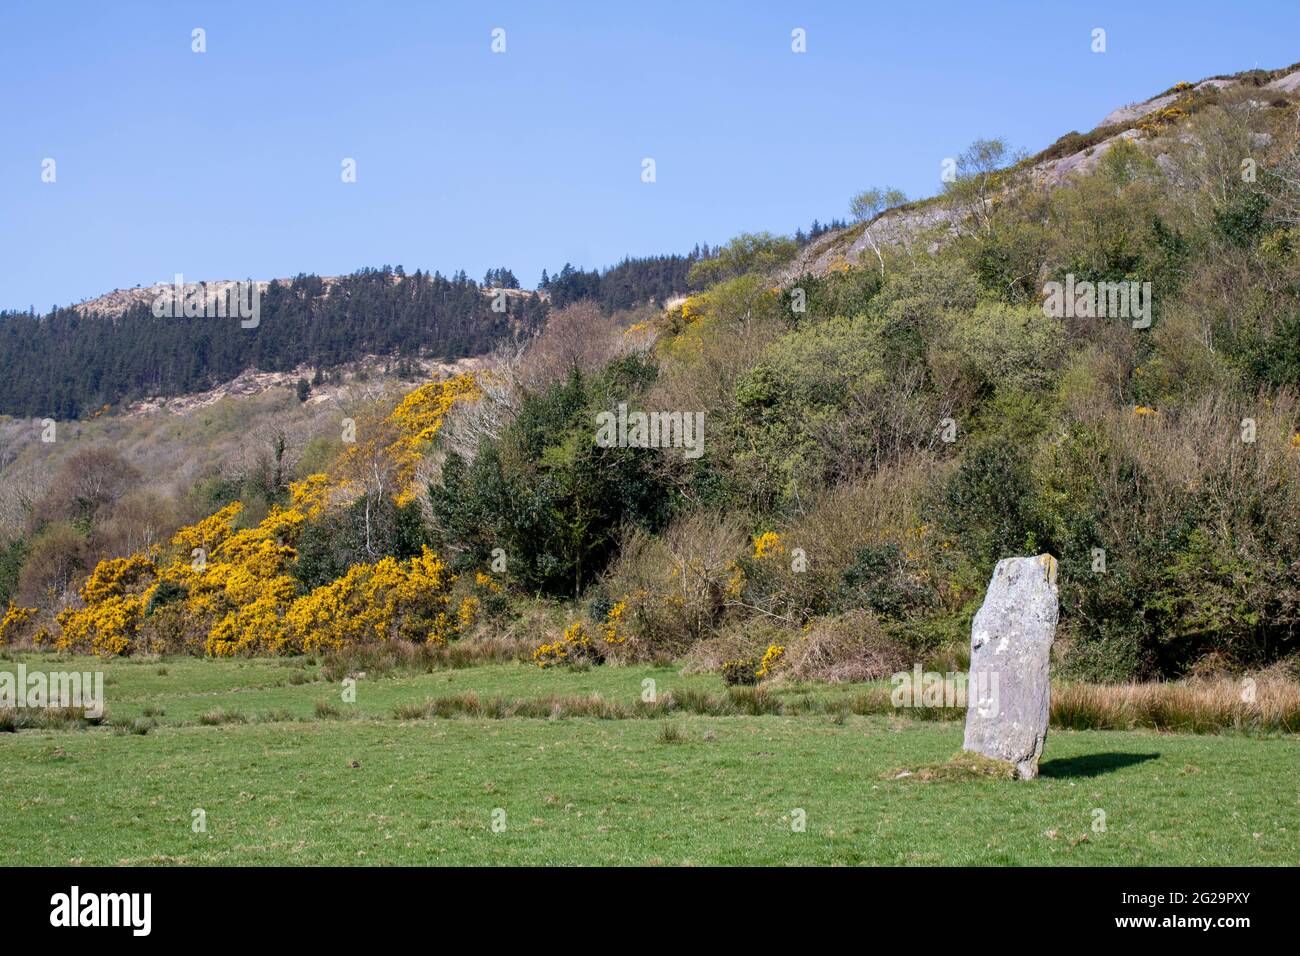 Farnanes standing stone Dunmanway West Cork Ireland. Standing Stones are thought to be ancient burial sites and are found in every county in Ireland. Stock Photo